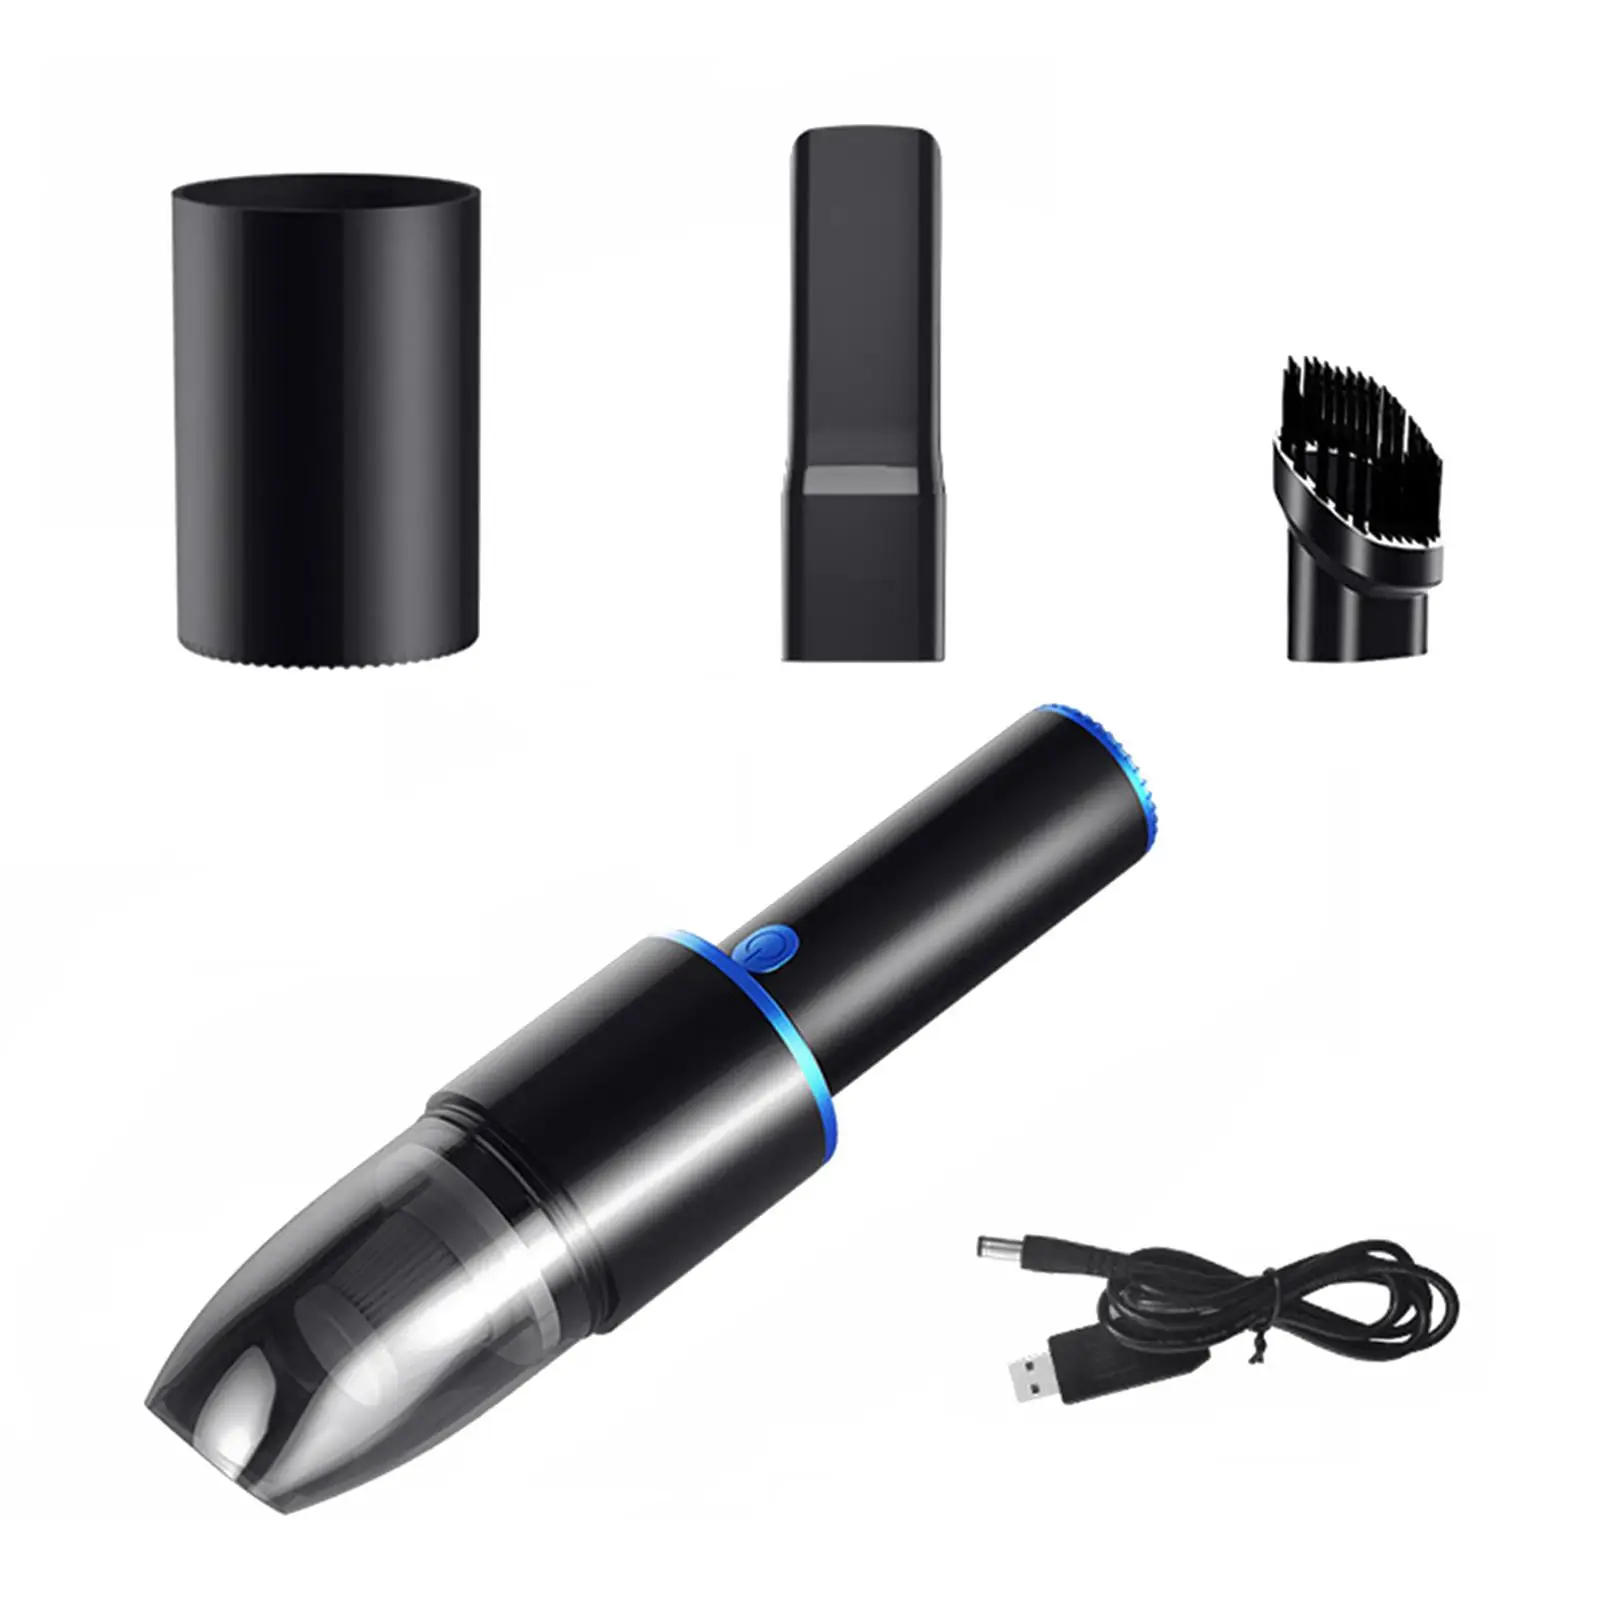 Portable Car Vacuum Cleaner Small Washable Handheld Vacuum for Office Crevices Pet Hair USB Rechargeable Fast Charge